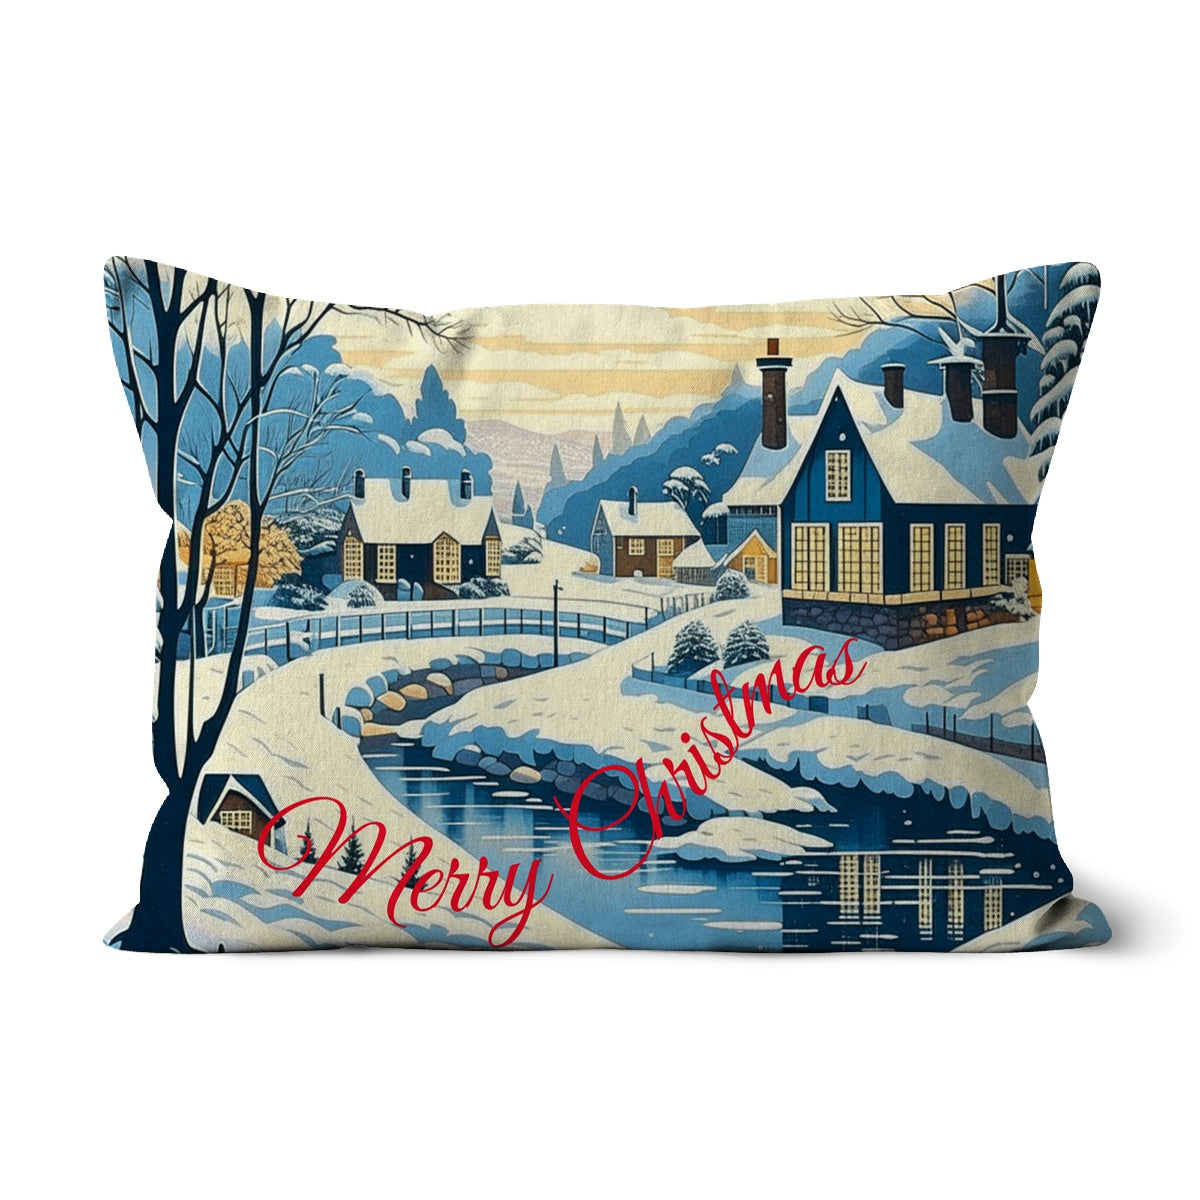 Merry Christmas Cottages Cushion